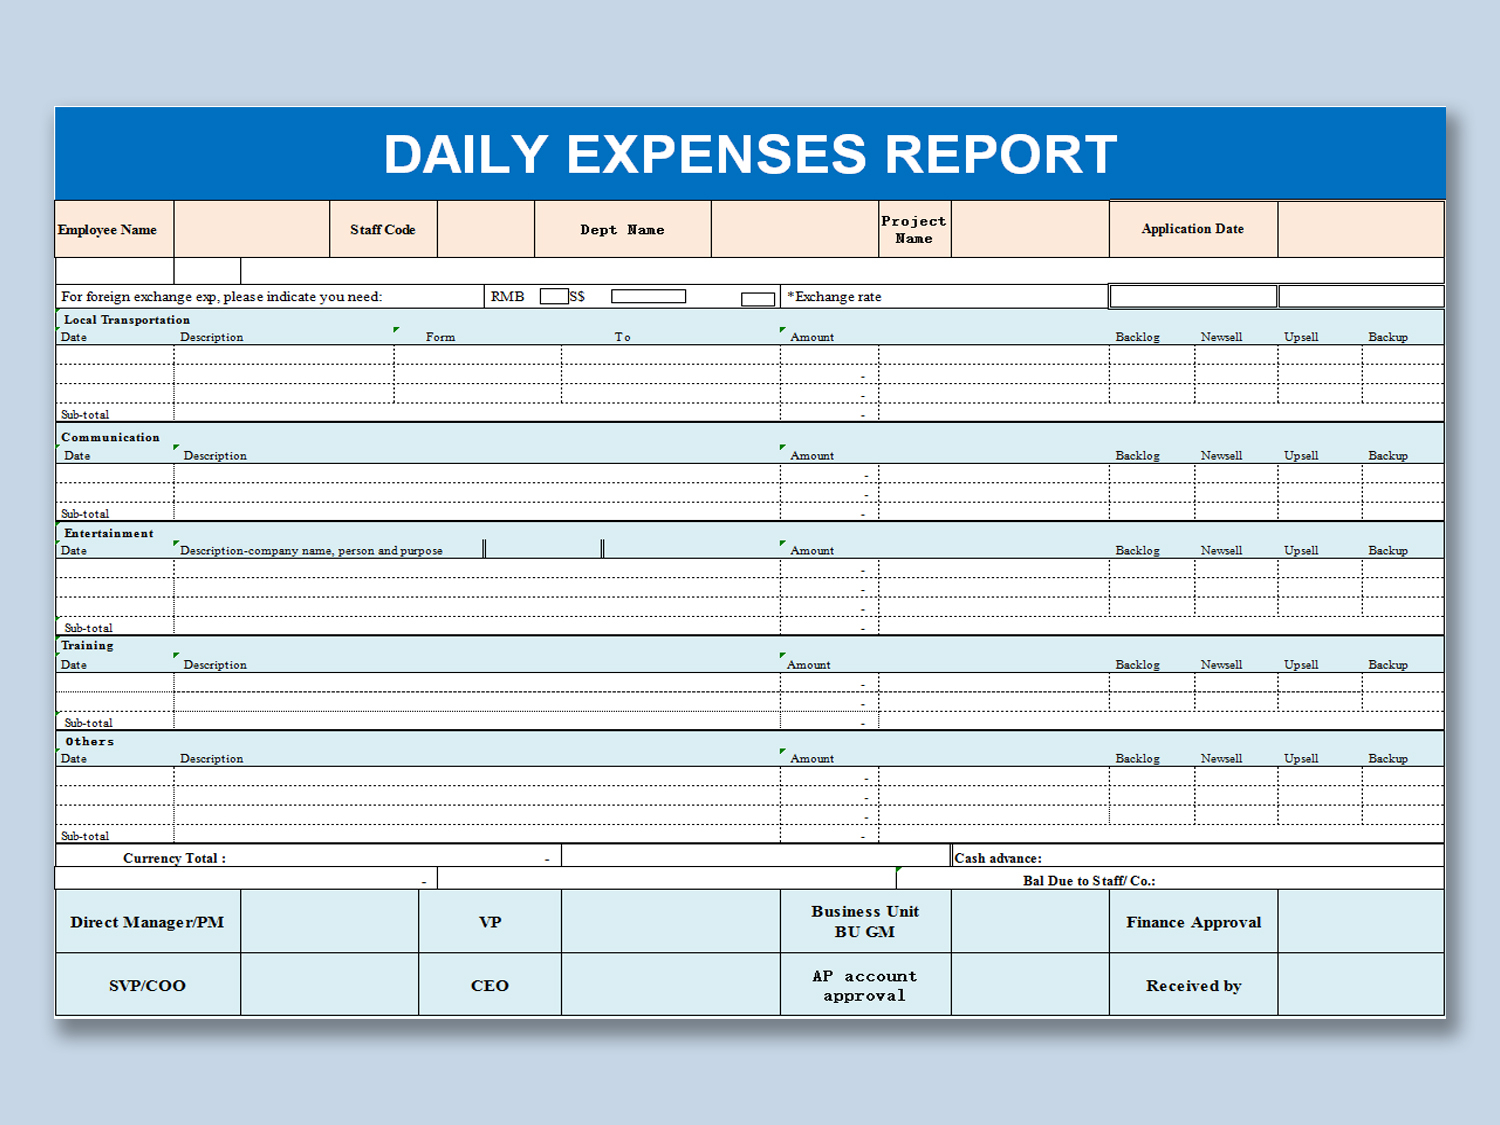 EXCEL of Daily Expenses Report